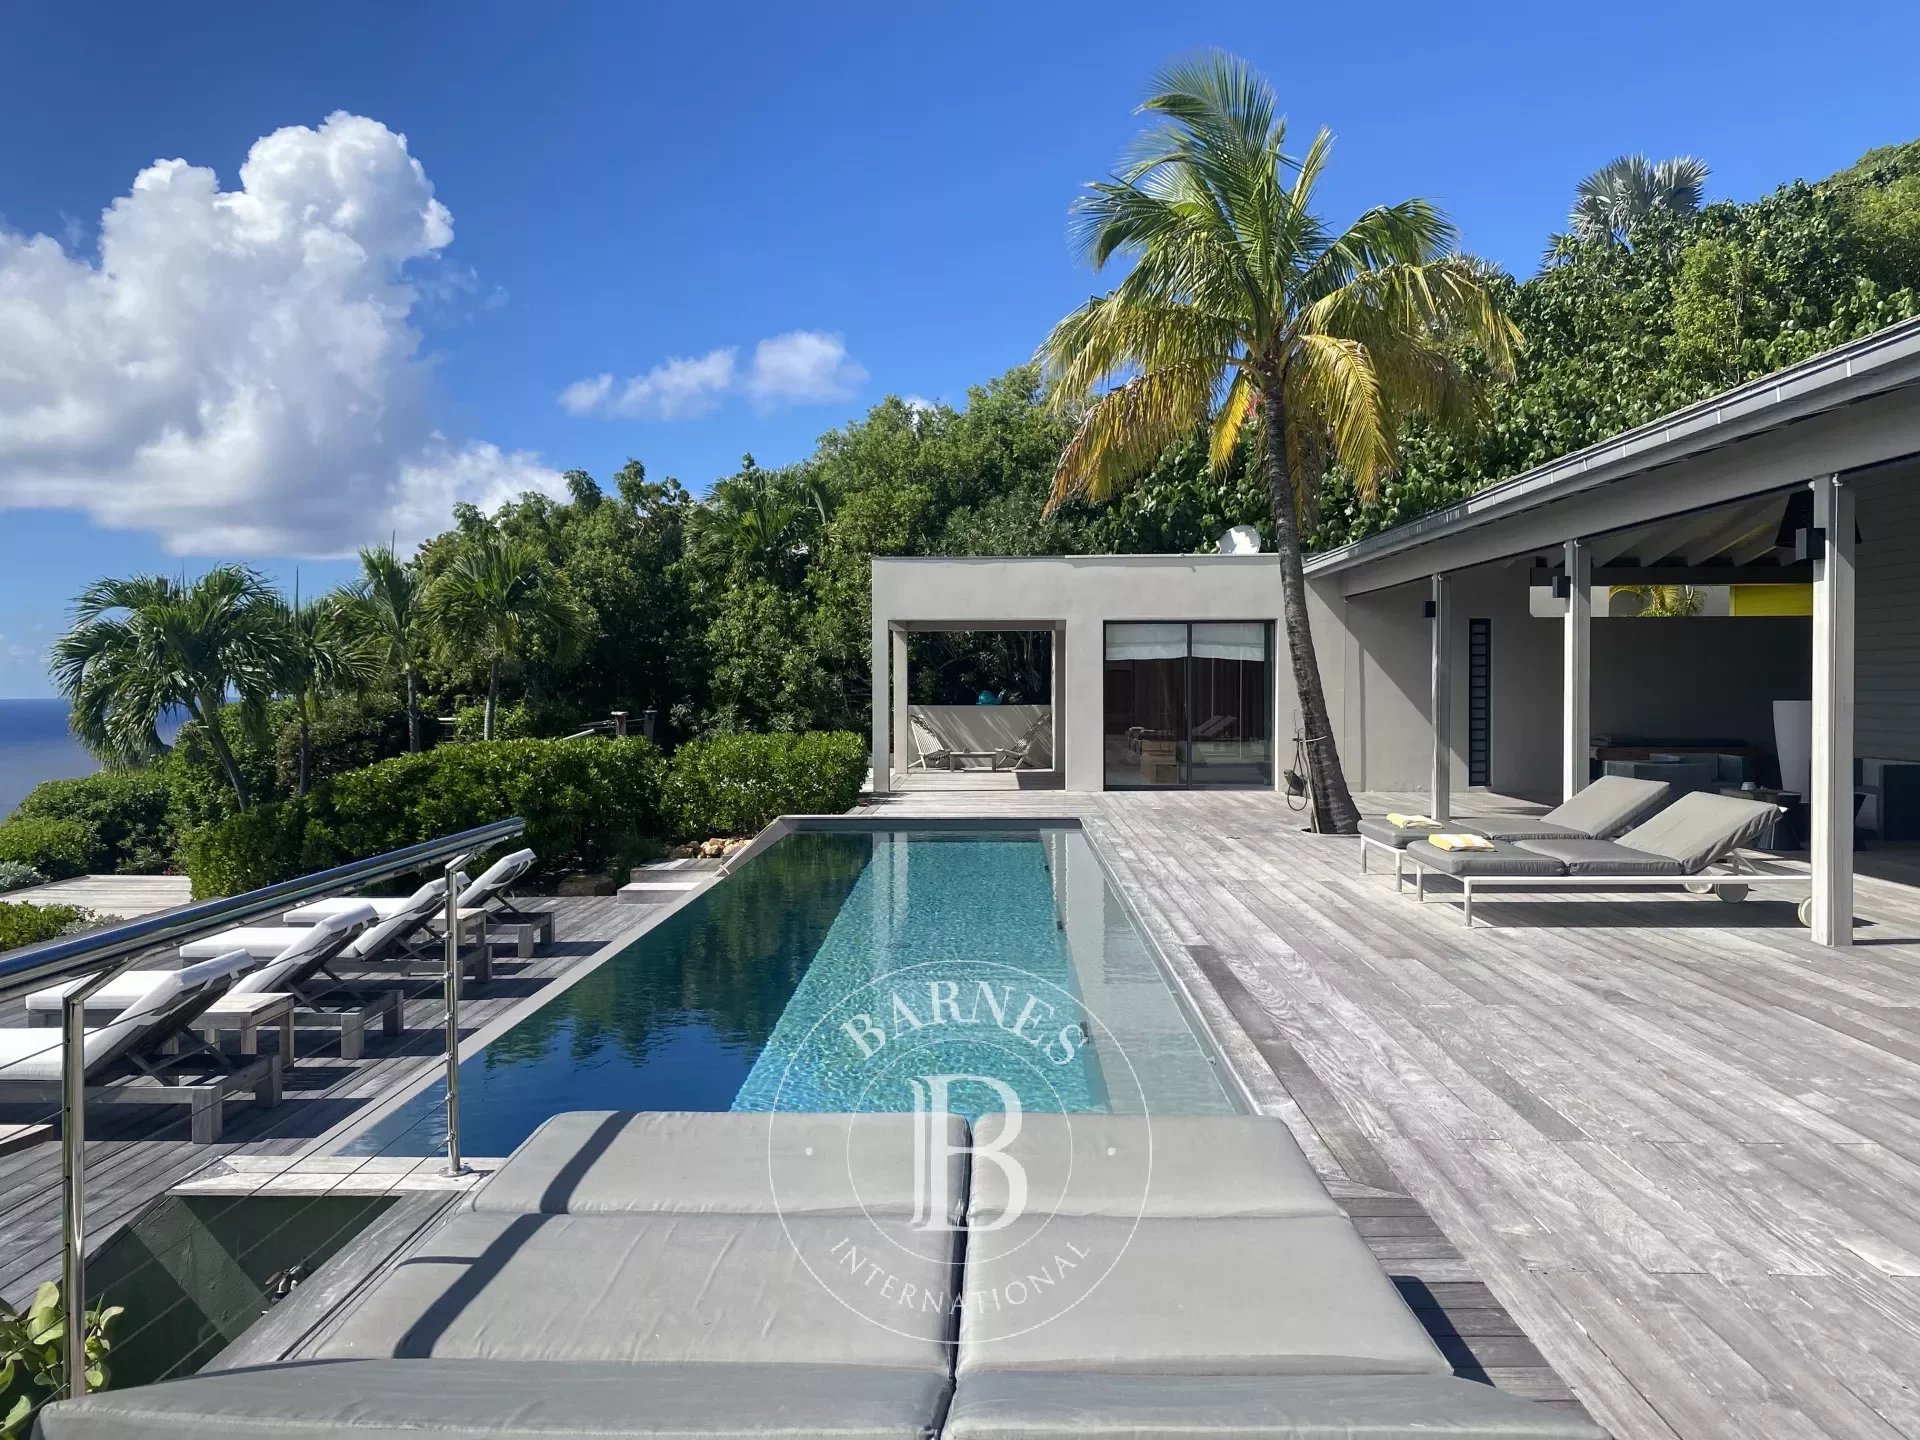 4 -Bedroom Villa in St.Barths - picture 4 title=